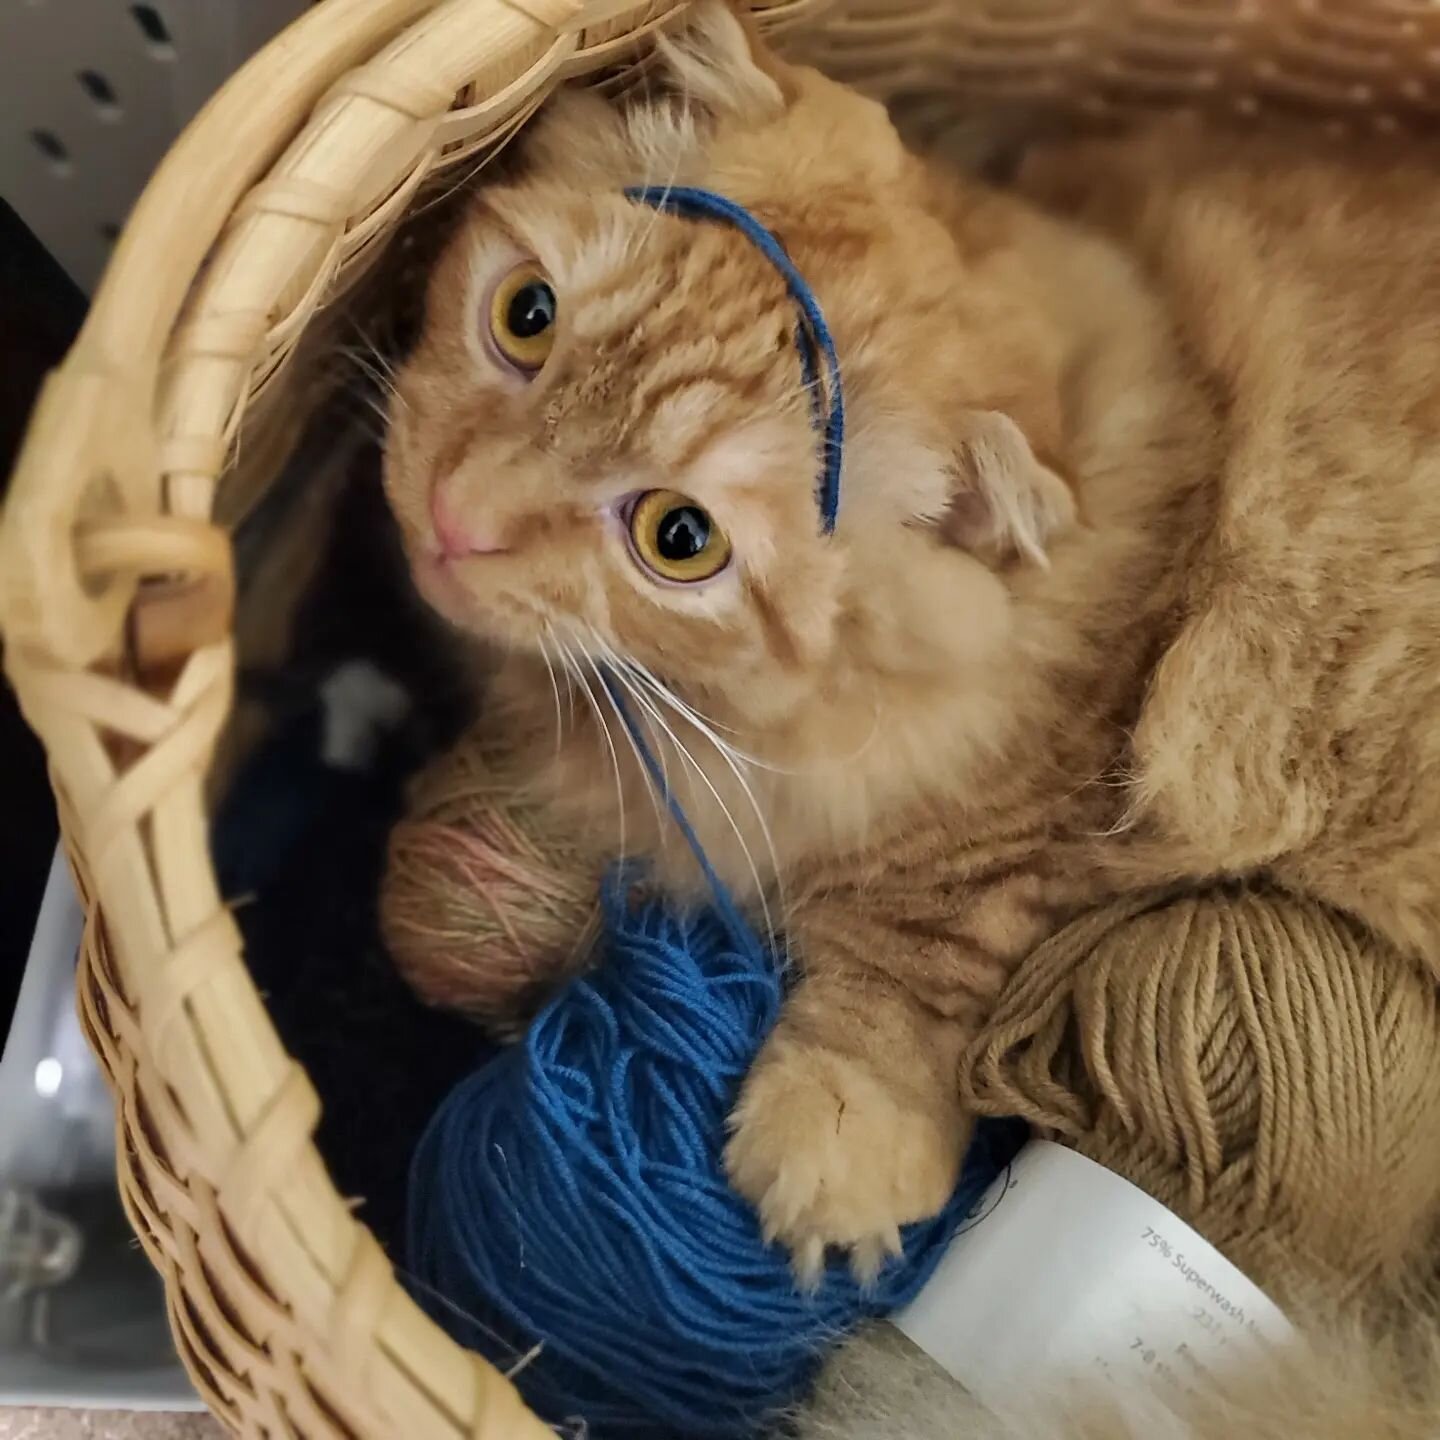 Good thing he is cute!

Tater Tot is a big fan of yarn.

Share a pic of your pet's yarn shenanigans.

#catatemyyarn #catsknit #catintrouble #fibergnome #cutecat #notmyyarn #pawsoff